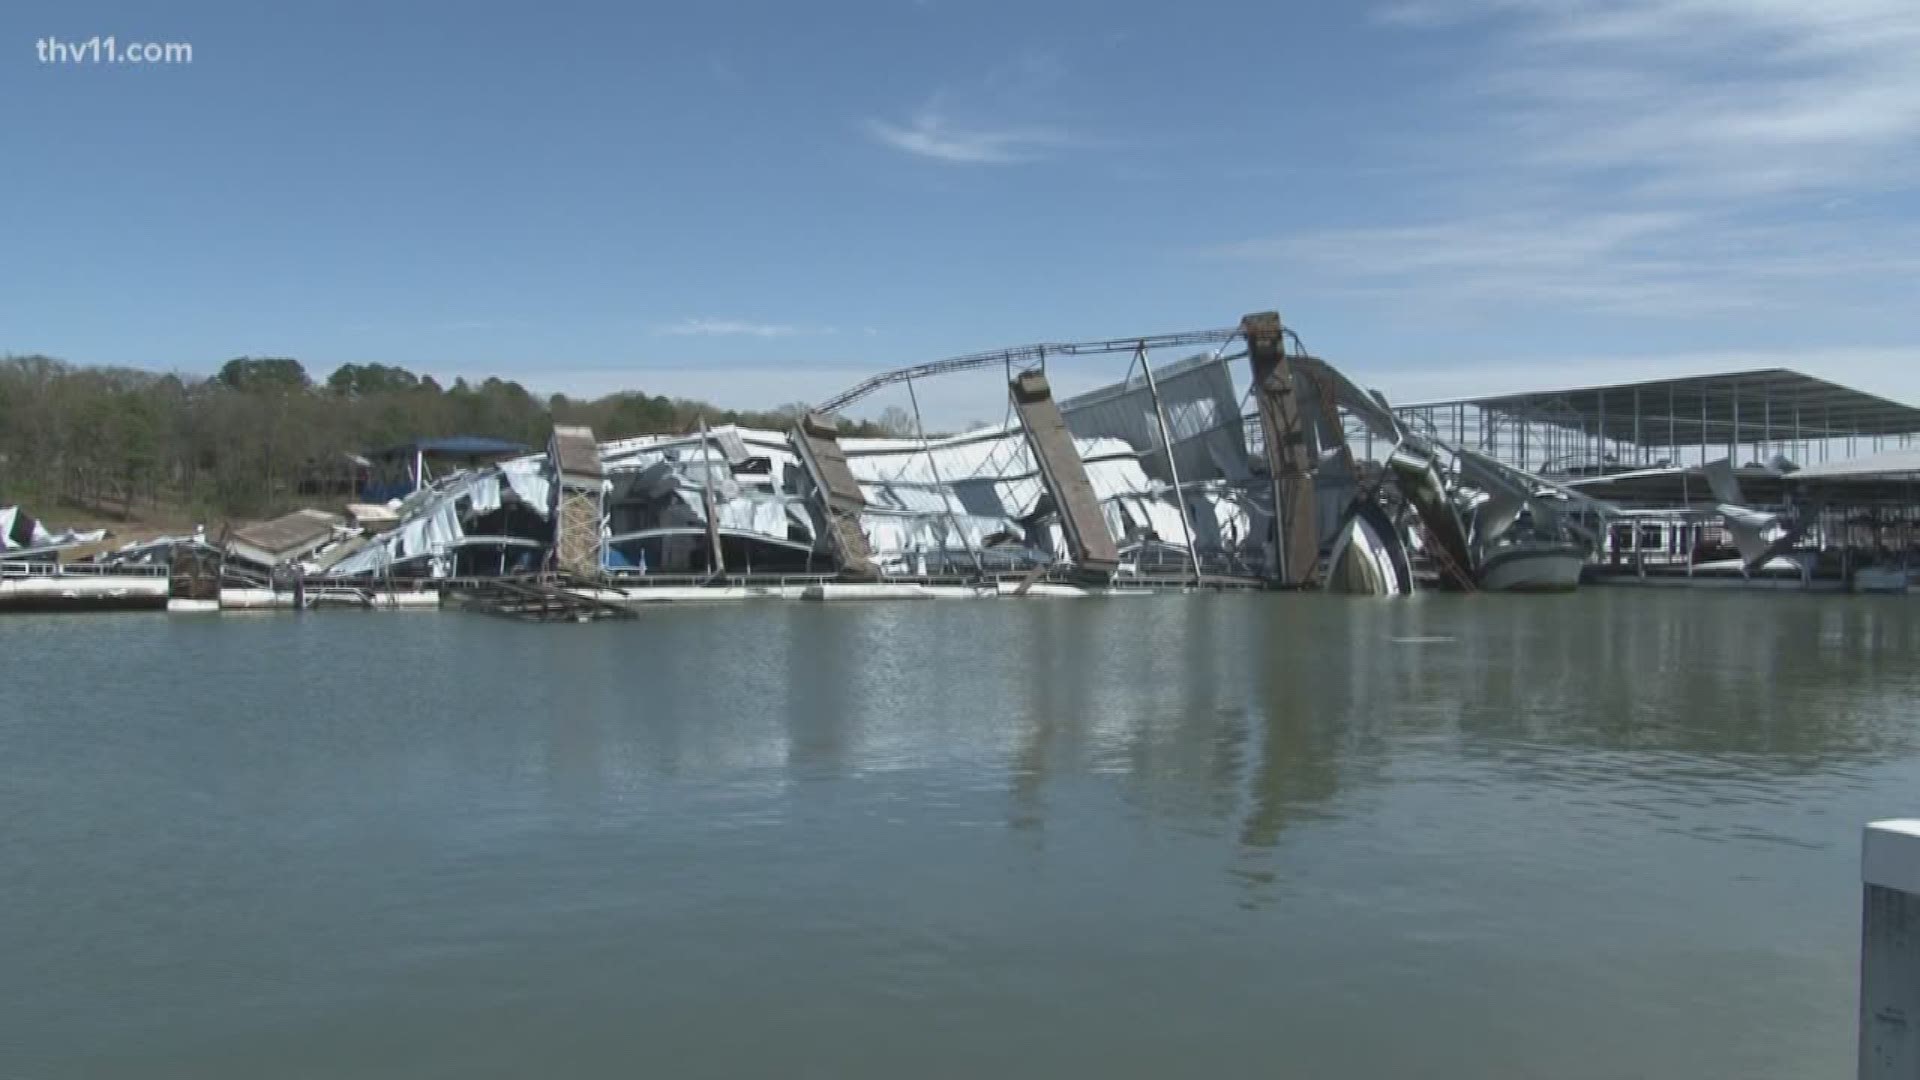 Lacy's Boating Center experienced massive damage that could take weeks to clean up.